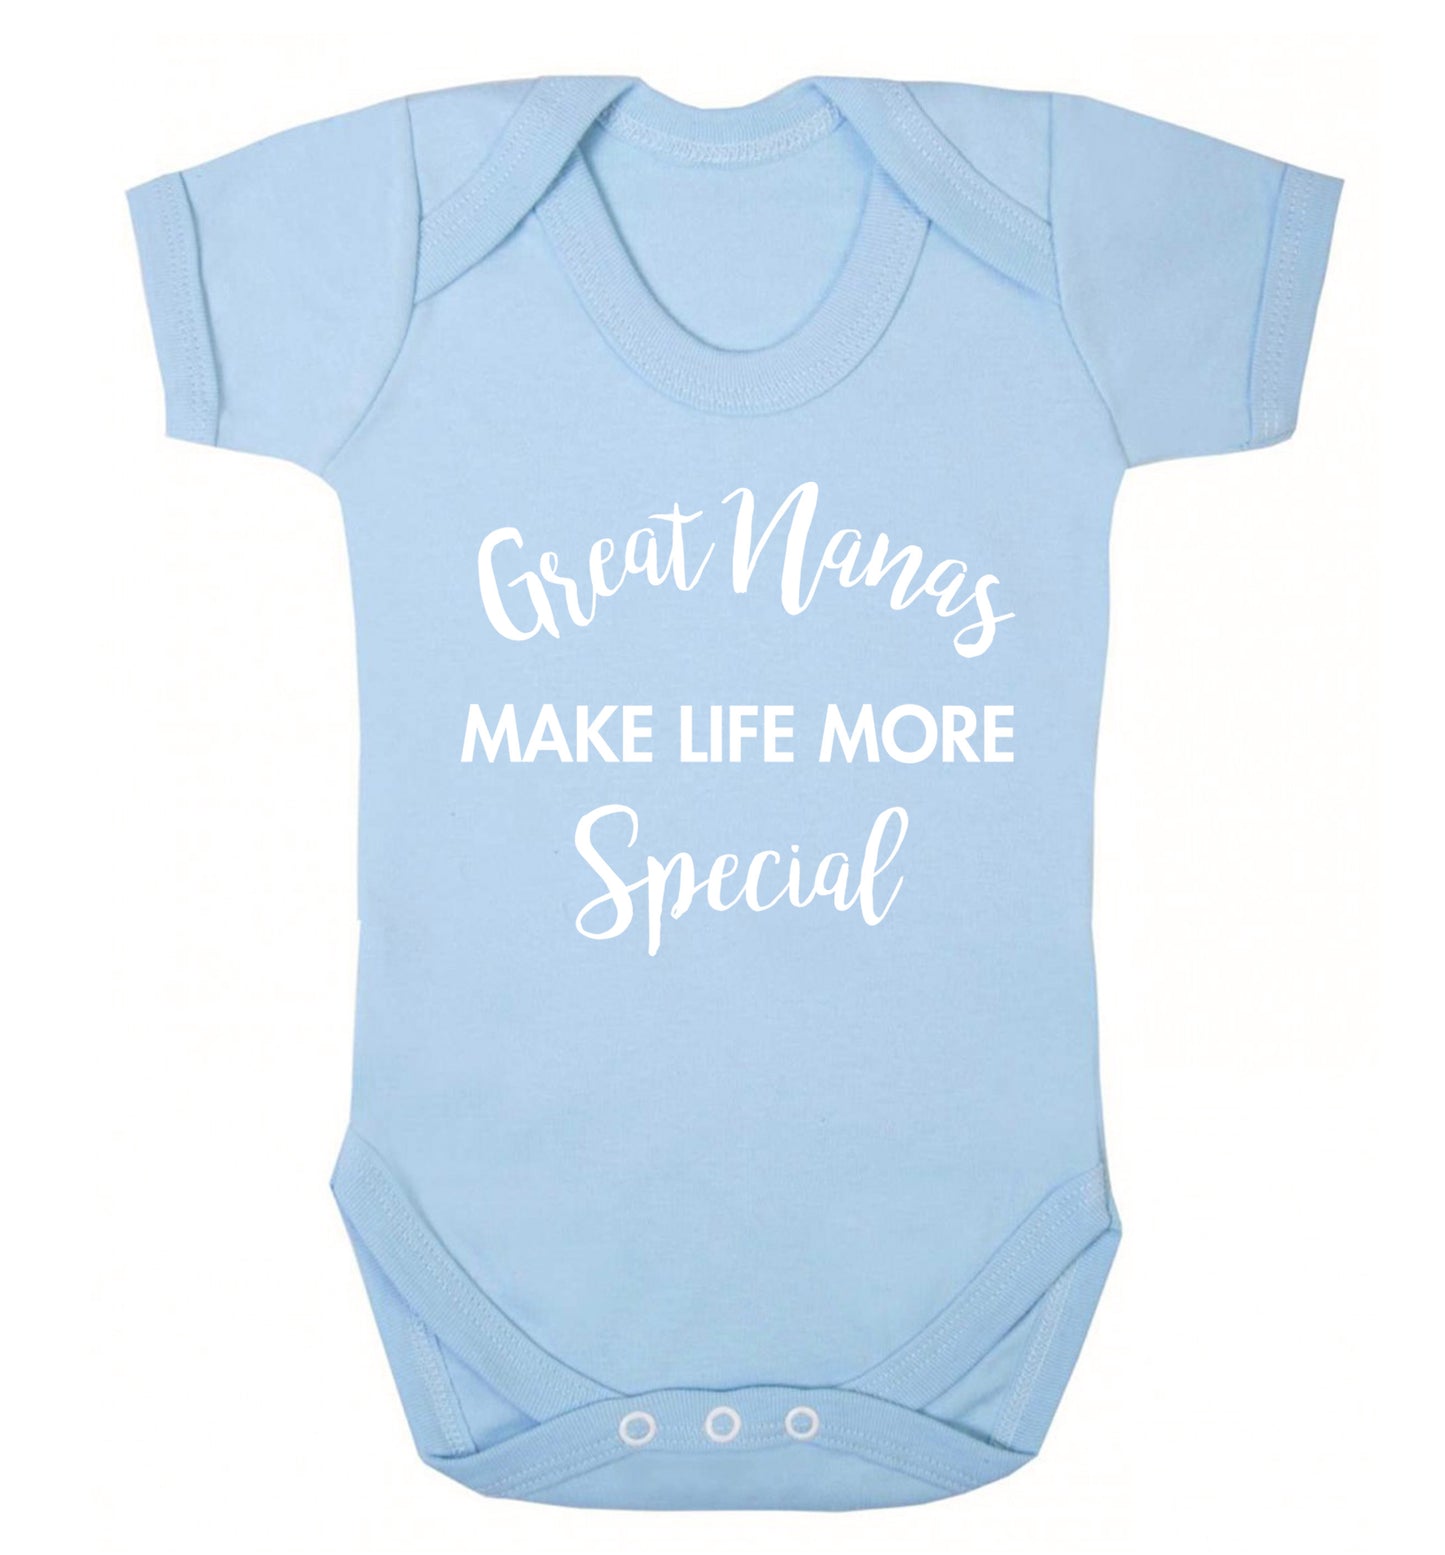 Great nanas make life more special Baby Vest pale blue 18-24 months